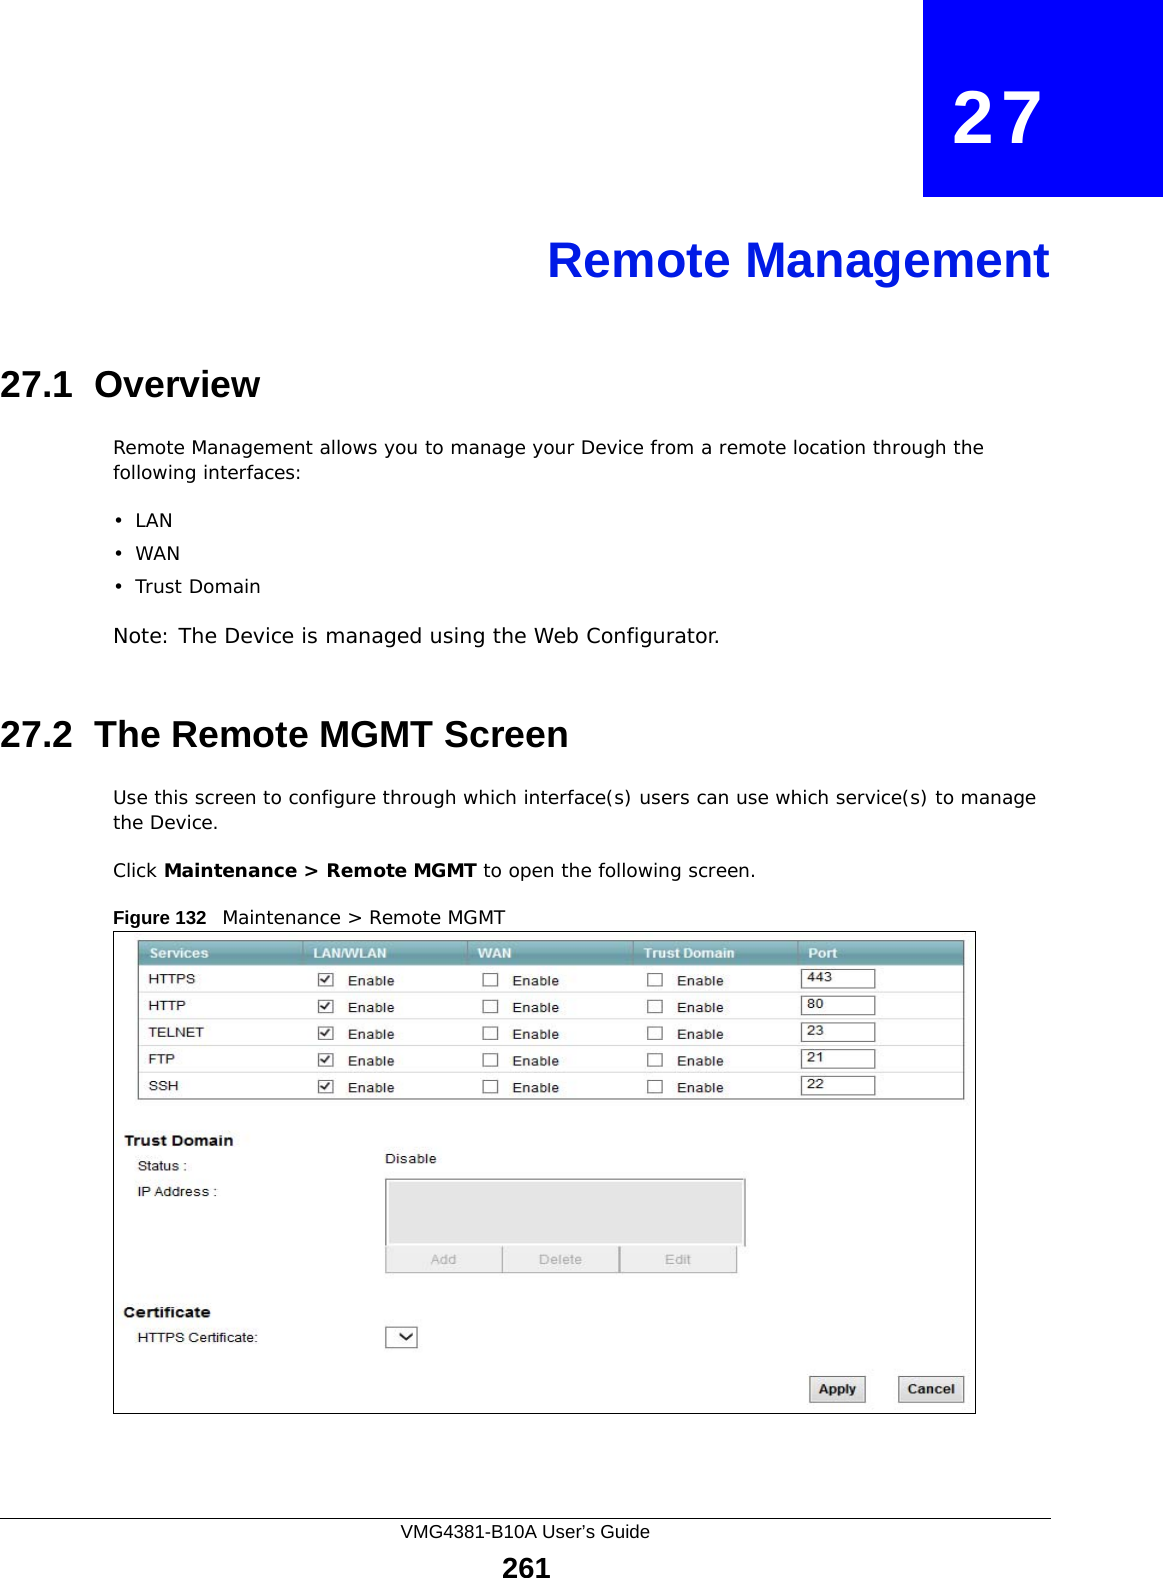 VMG4381-B10A User’s Guide261CHAPTER   27Remote Management27.1  OverviewRemote Management allows you to manage your Device from a remote location through the following interfaces:•LAN•WAN•Trust DomainNote: The Device is managed using the Web Configurator.27.2  The Remote MGMT ScreenUse this screen to configure through which interface(s) users can use which service(s) to manage the Device.Click Maintenance &gt; Remote MGMT to open the following screen. Figure 132   Maintenance &gt; Remote MGMT 